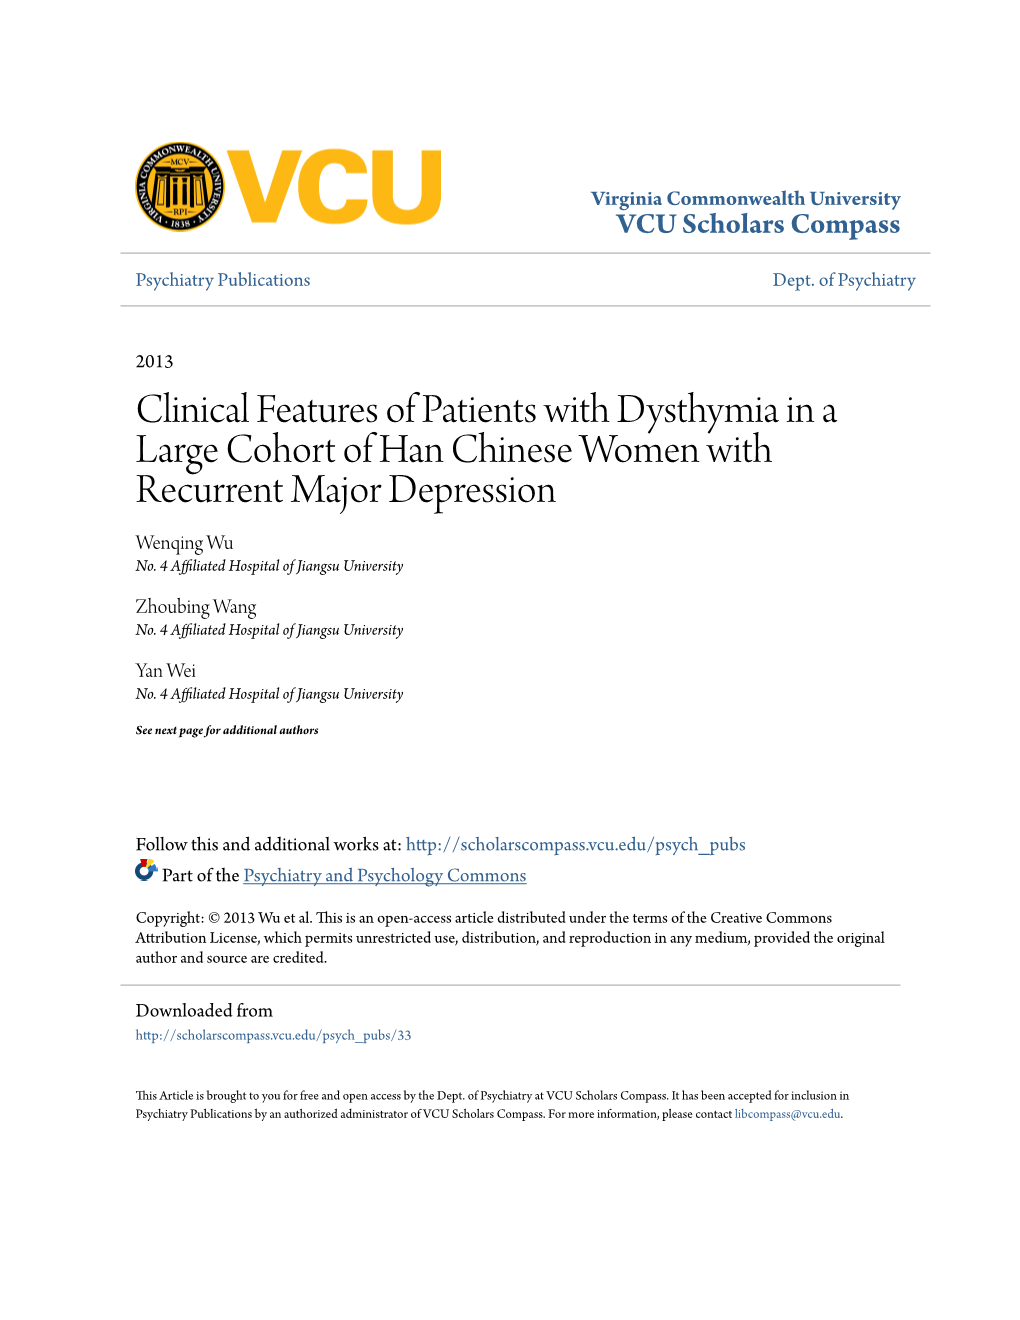 Clinical Features of Patients with Dysthymia in a Large Cohort of Han Chinese Women with Recurrent Major Depression Wenqing Wu No